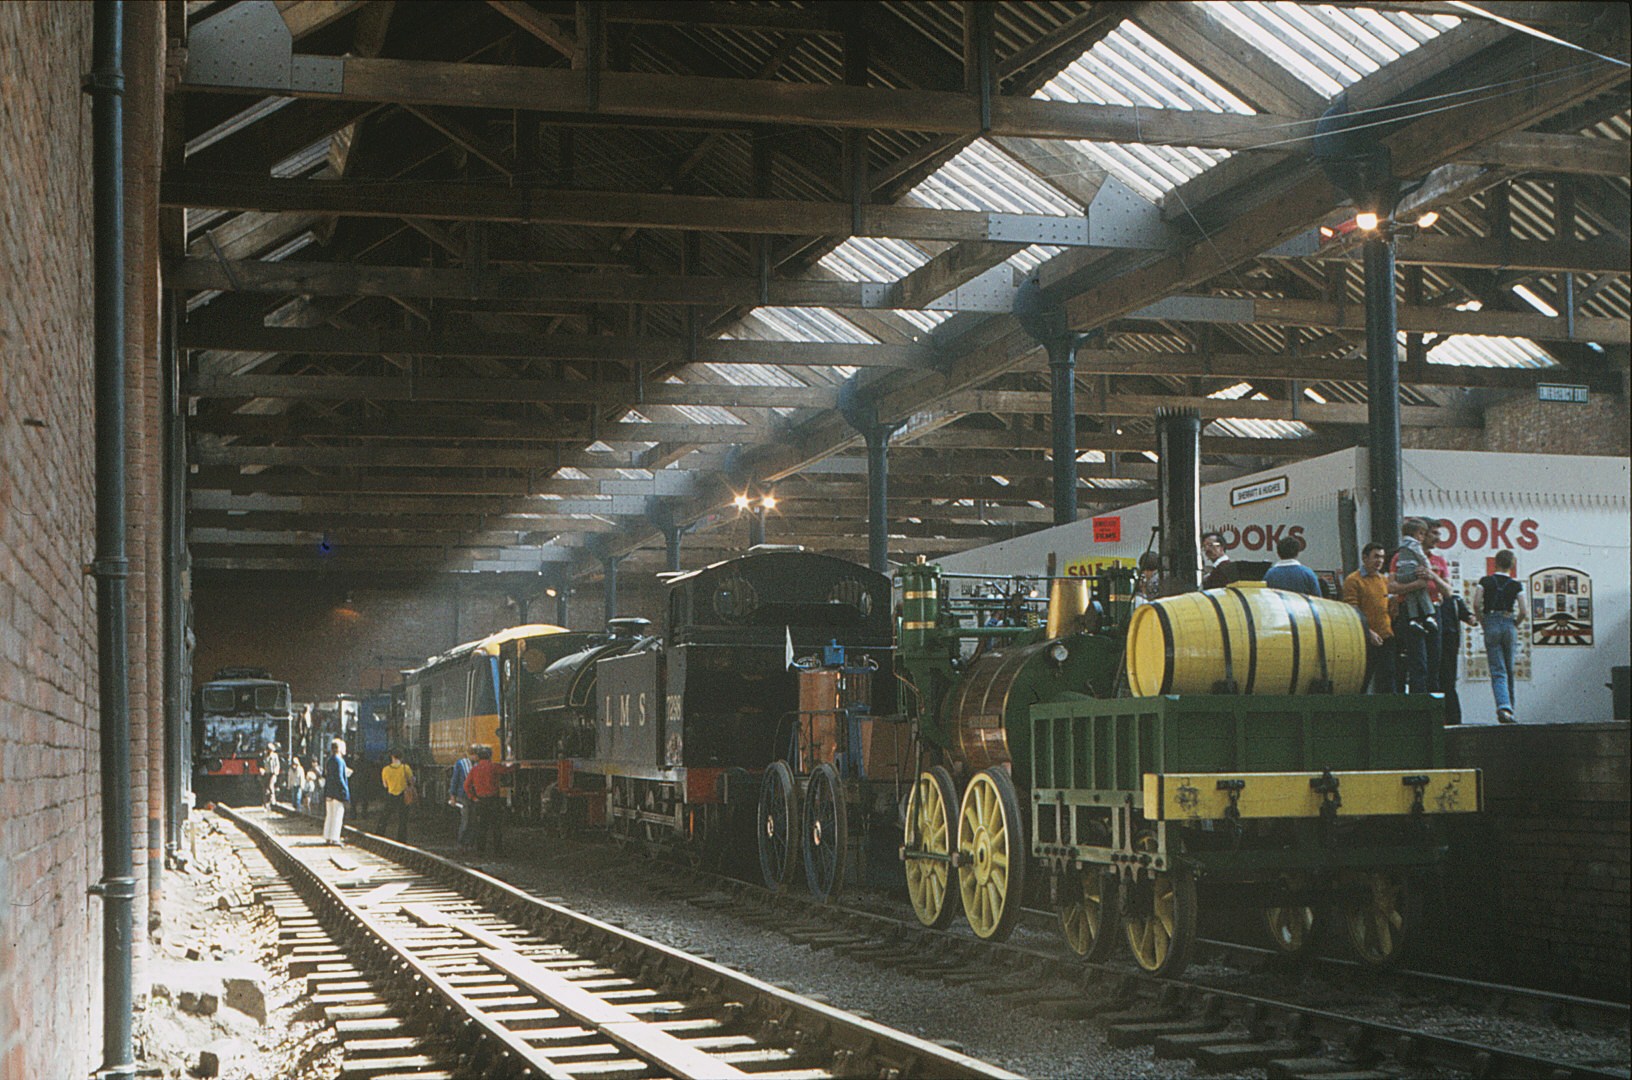 Replicas of the Novelty and Rocket and other locomotives are brought together at the Great Railway Exposition, 1980. Liverpool Road Station Society.